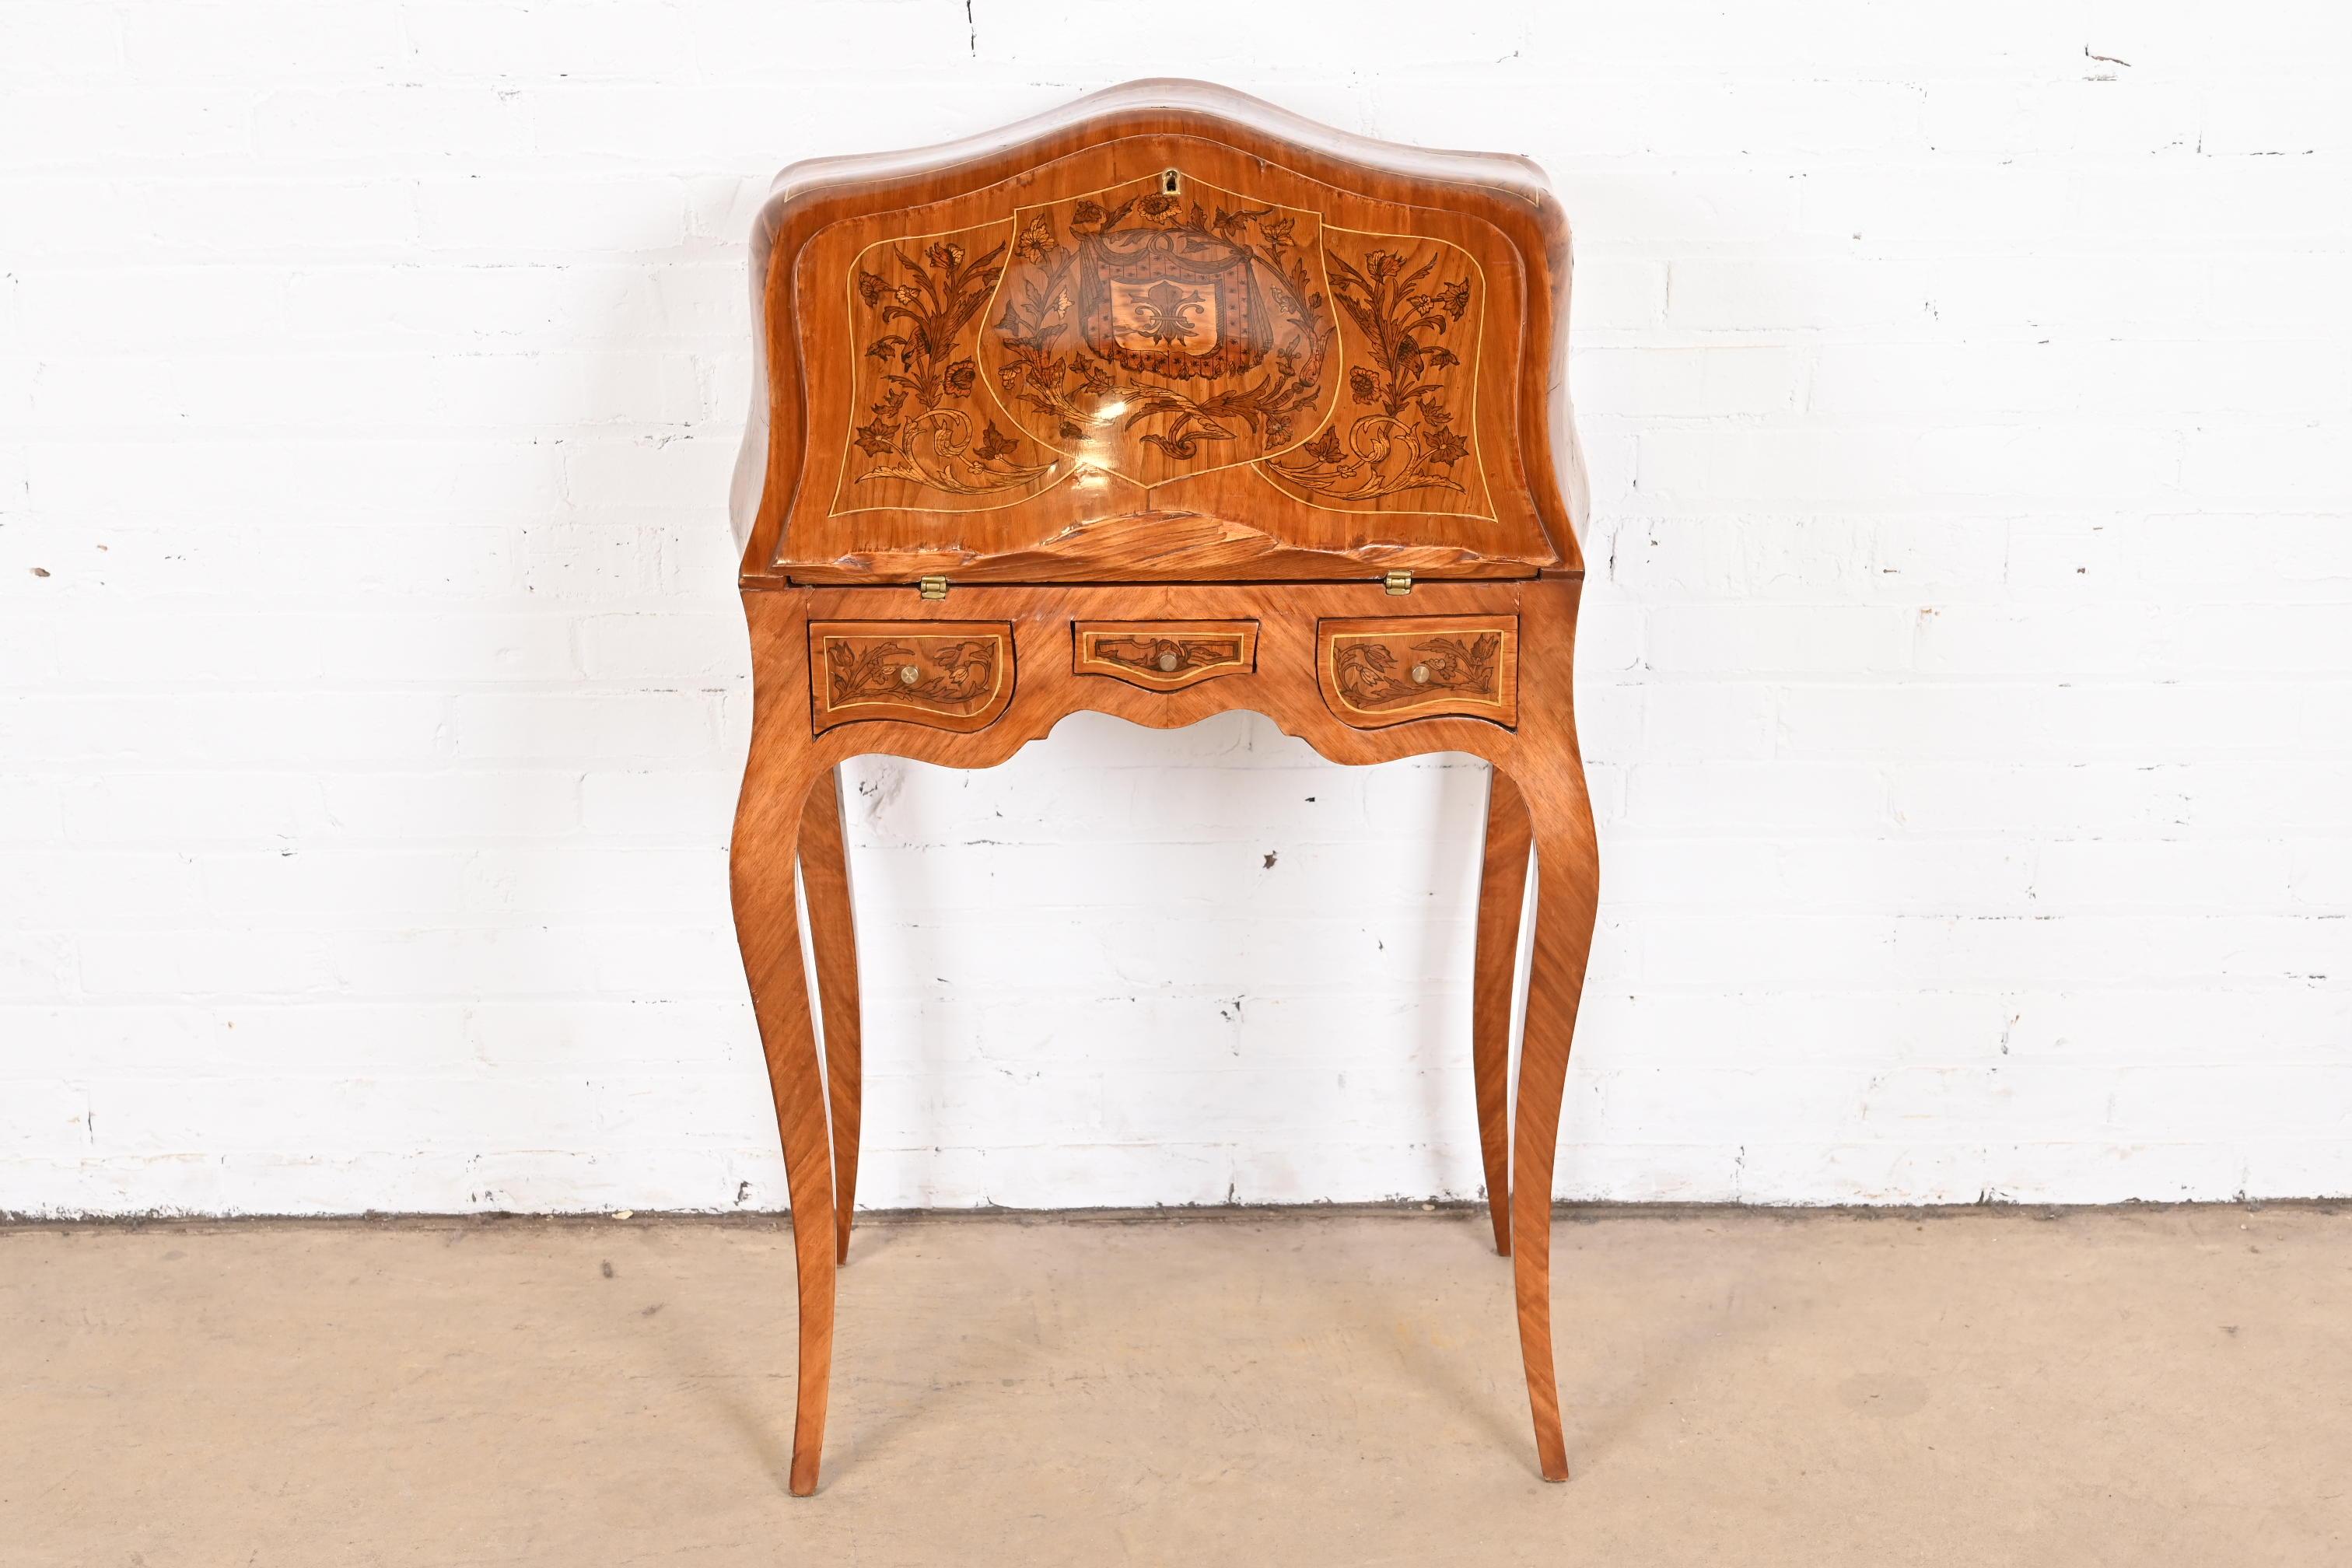 A gorgeous Italian petite slant front writing desk or secretary desk

Italy, circa Mid-20th century

Mahogany and burl wood, with beautiful marquetry inlay, and original brass hardware.

Desk measures: 23.75